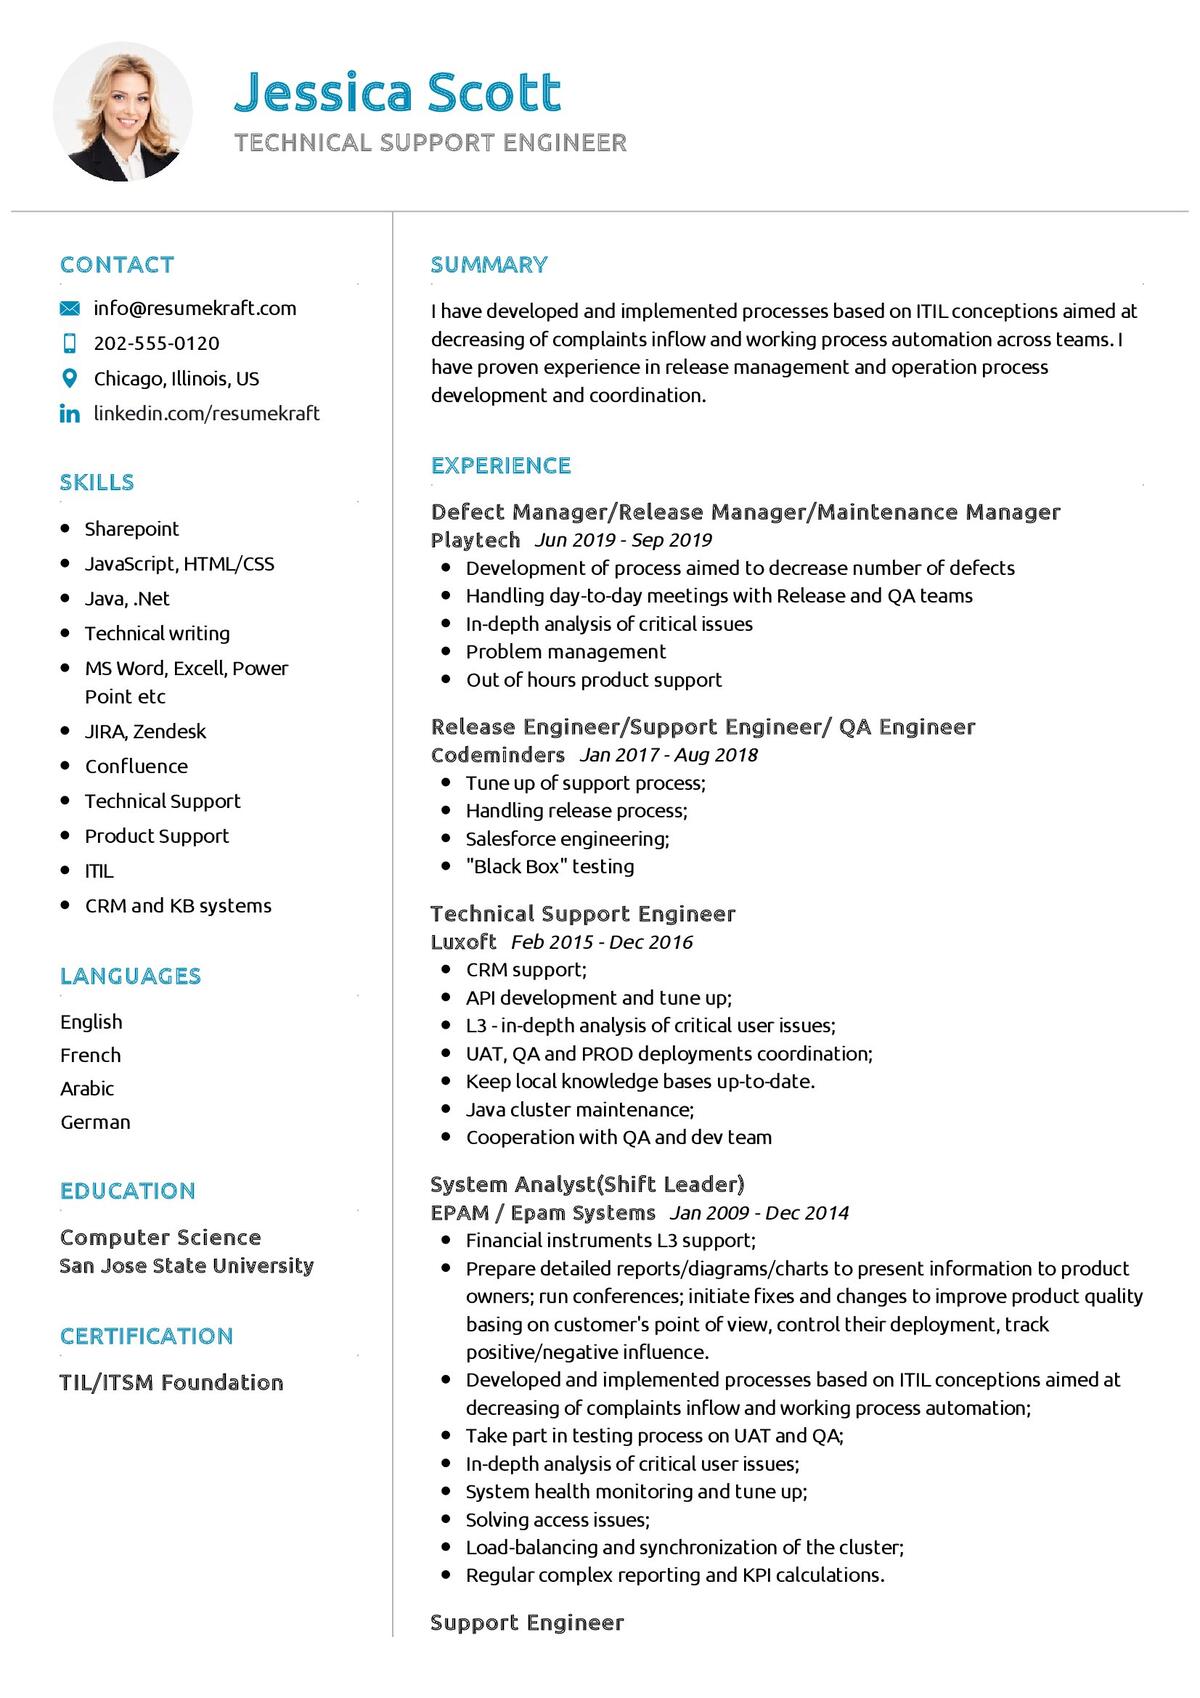 technical support resume keywords